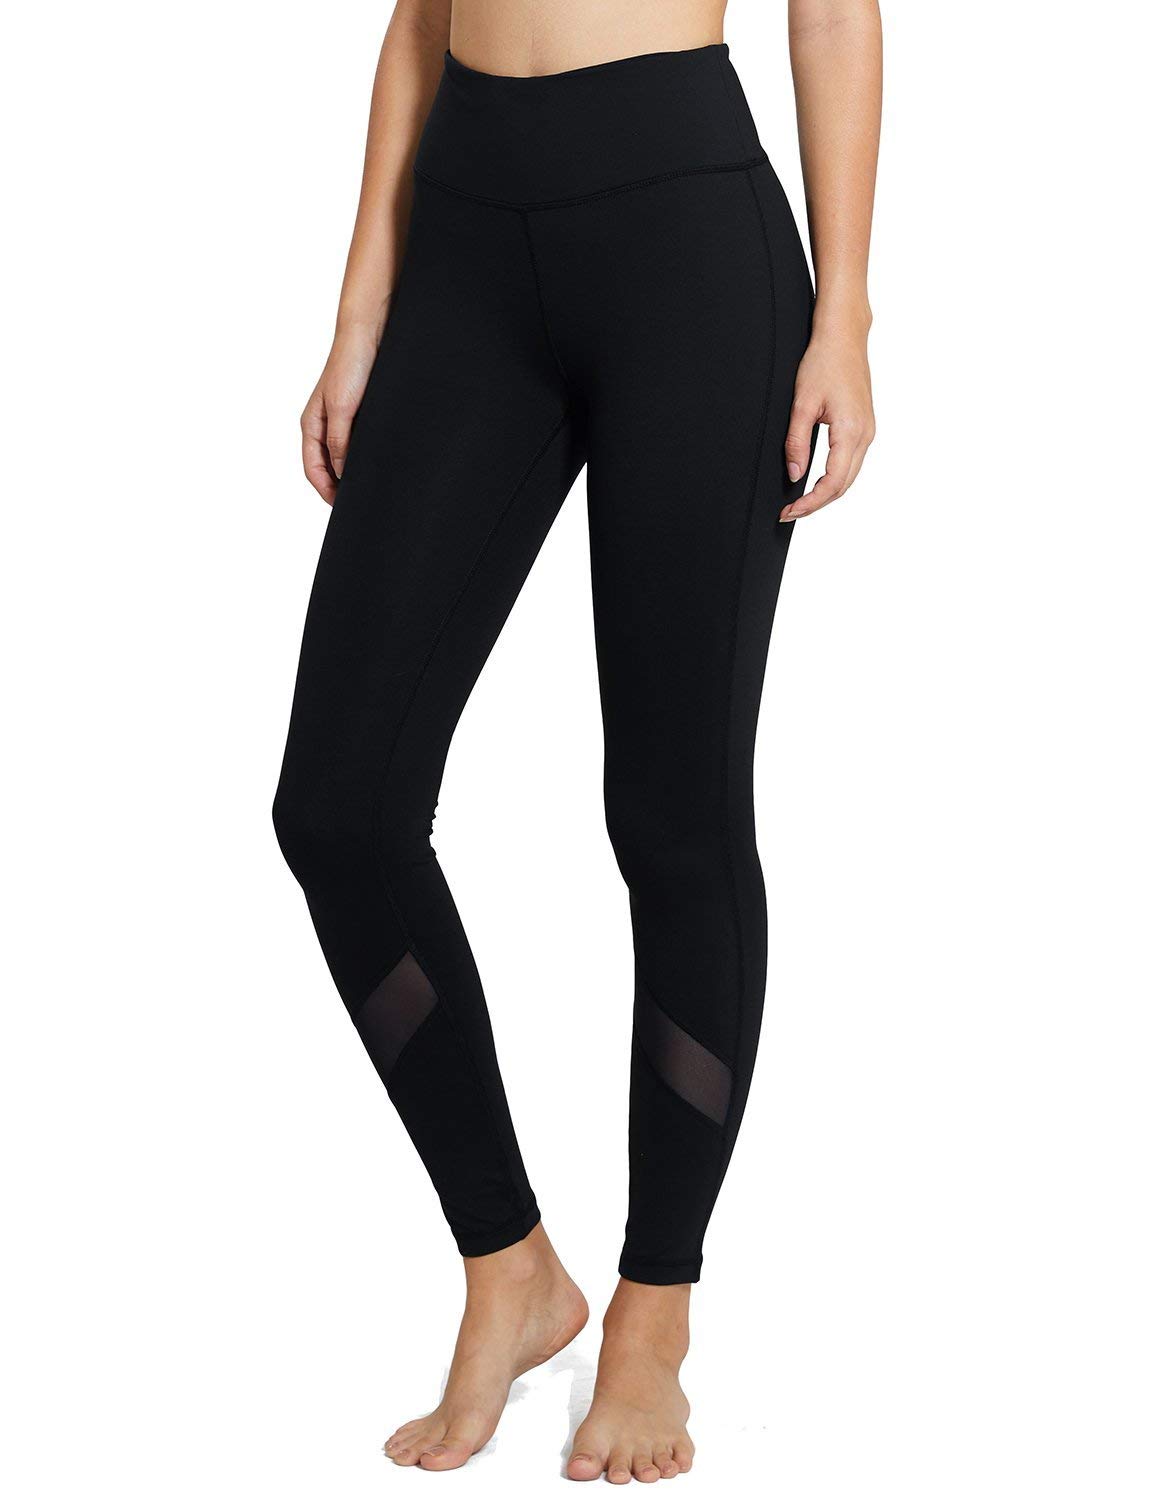 7 Best Hot Yoga Pants Womens Leggings for Staying Dry While Sweating  Buckets  The Yoga Nomads